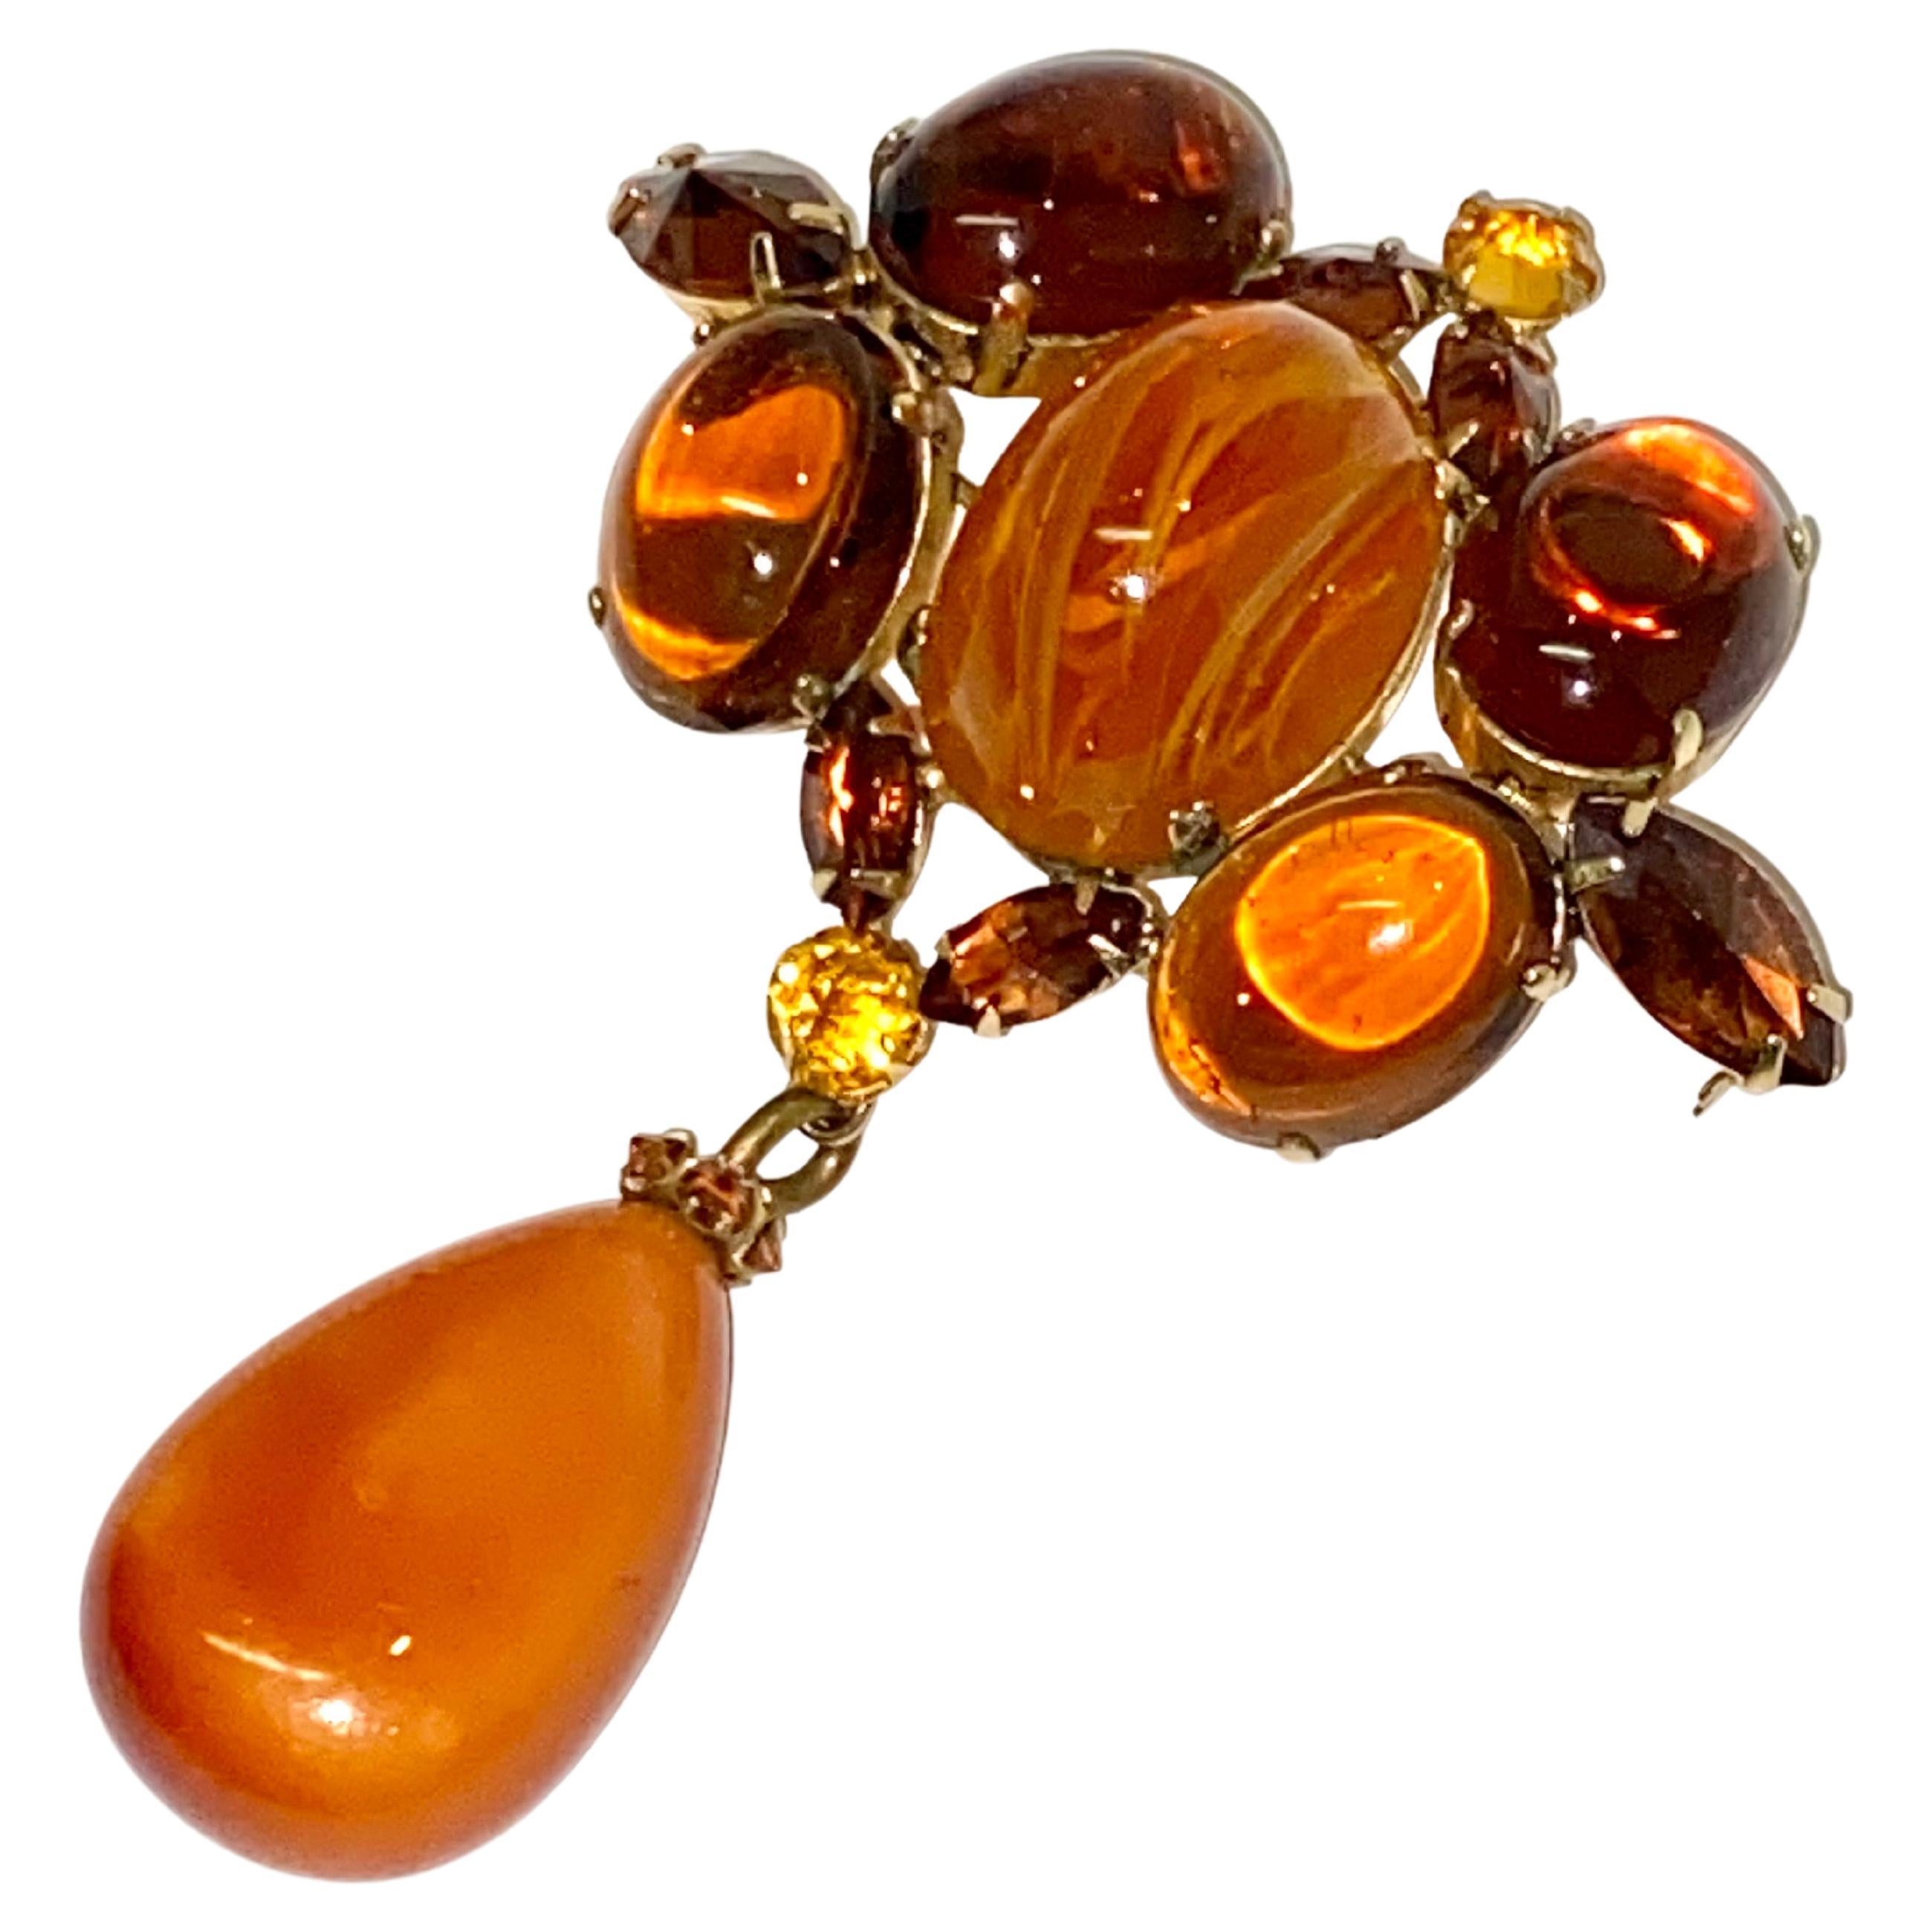 An absolutely stunning and rare color combination Schreiner, New York brooch from the 1950s. The brooch is unique in its use of amber brown and honey caramel color un-foiled glass cabochon stones. The oval glass center stone, measuring .96 of an